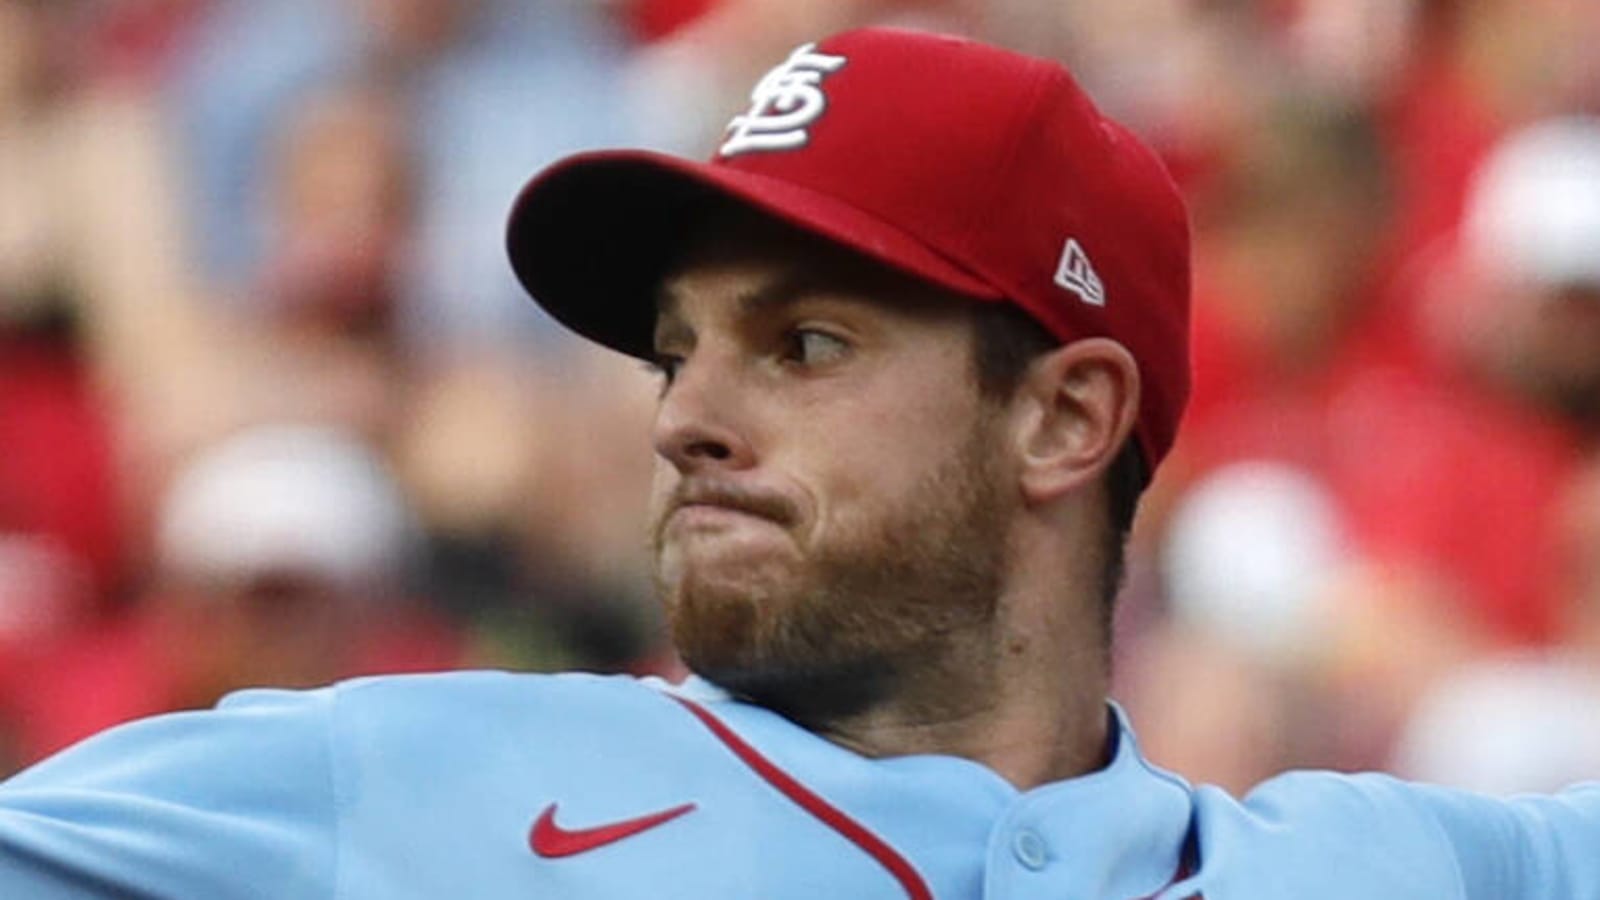 Cardinals SP Steven Matz diagnosed with torn MCL, putting season in doubt